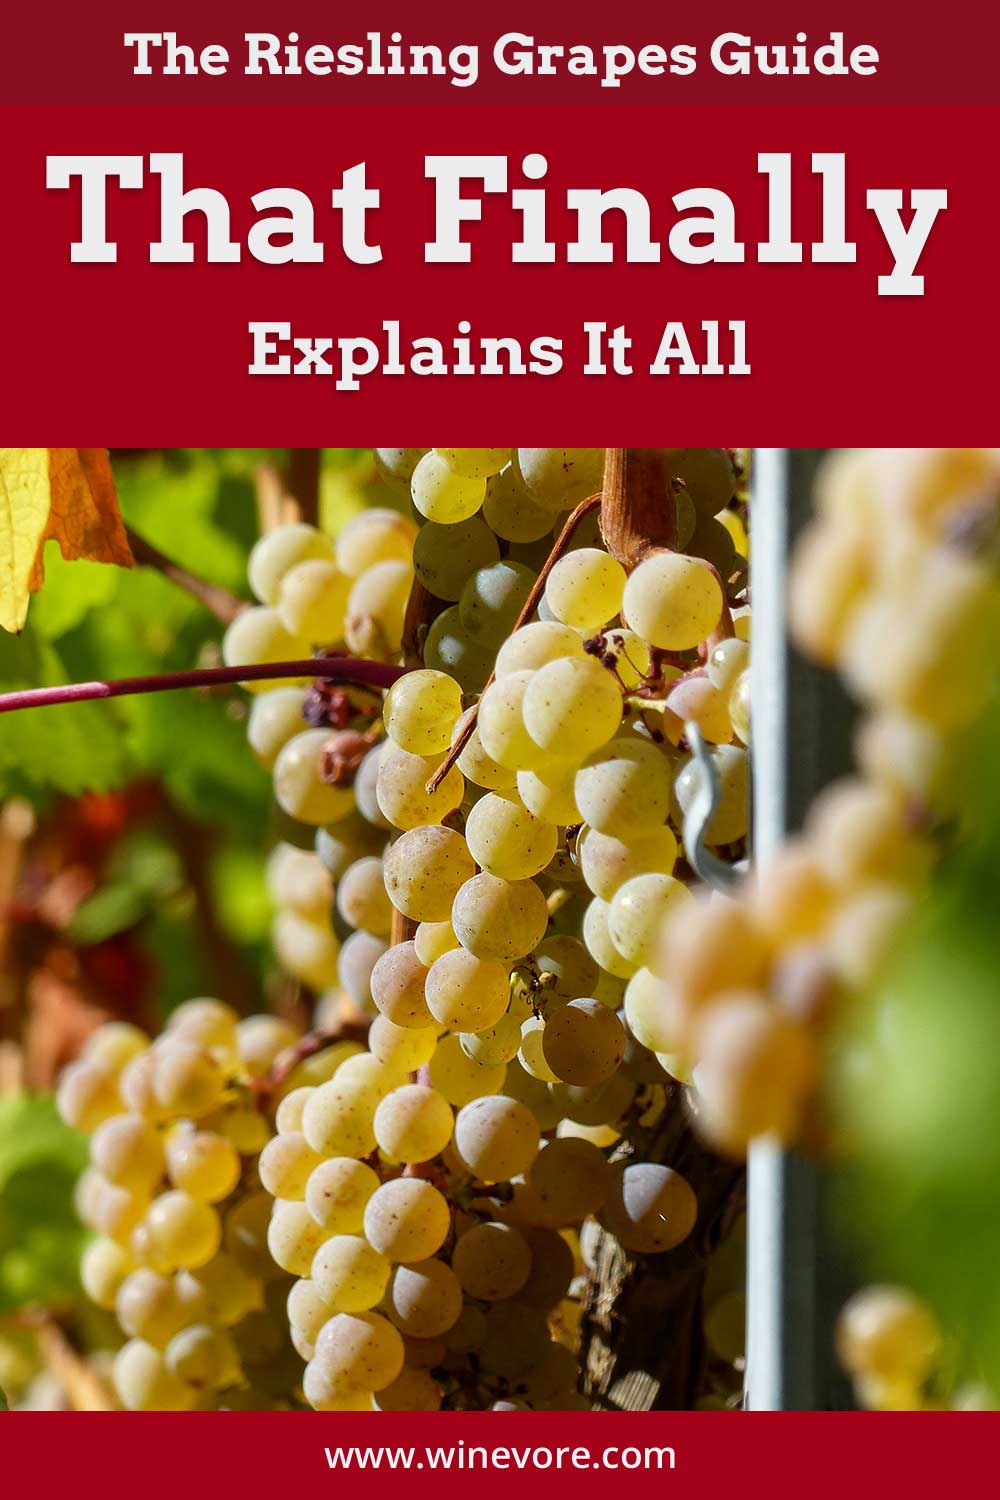 A bunch of green grapes - The Riesling Grapes Guide